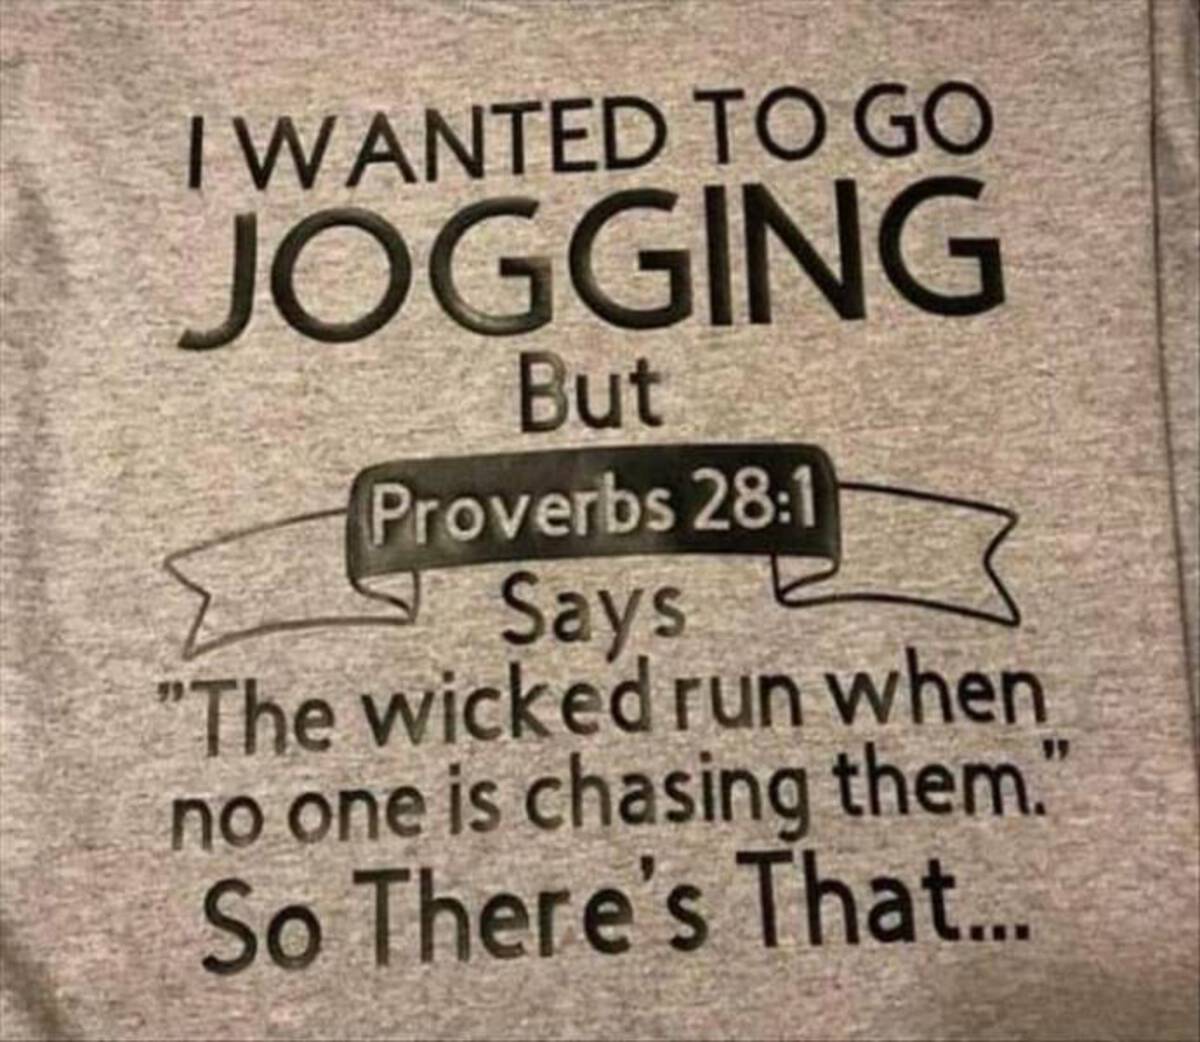 signage - I Wanted To Go Jogging But Proverbs Says "The wicked run when no one is chasing them." So There's That...